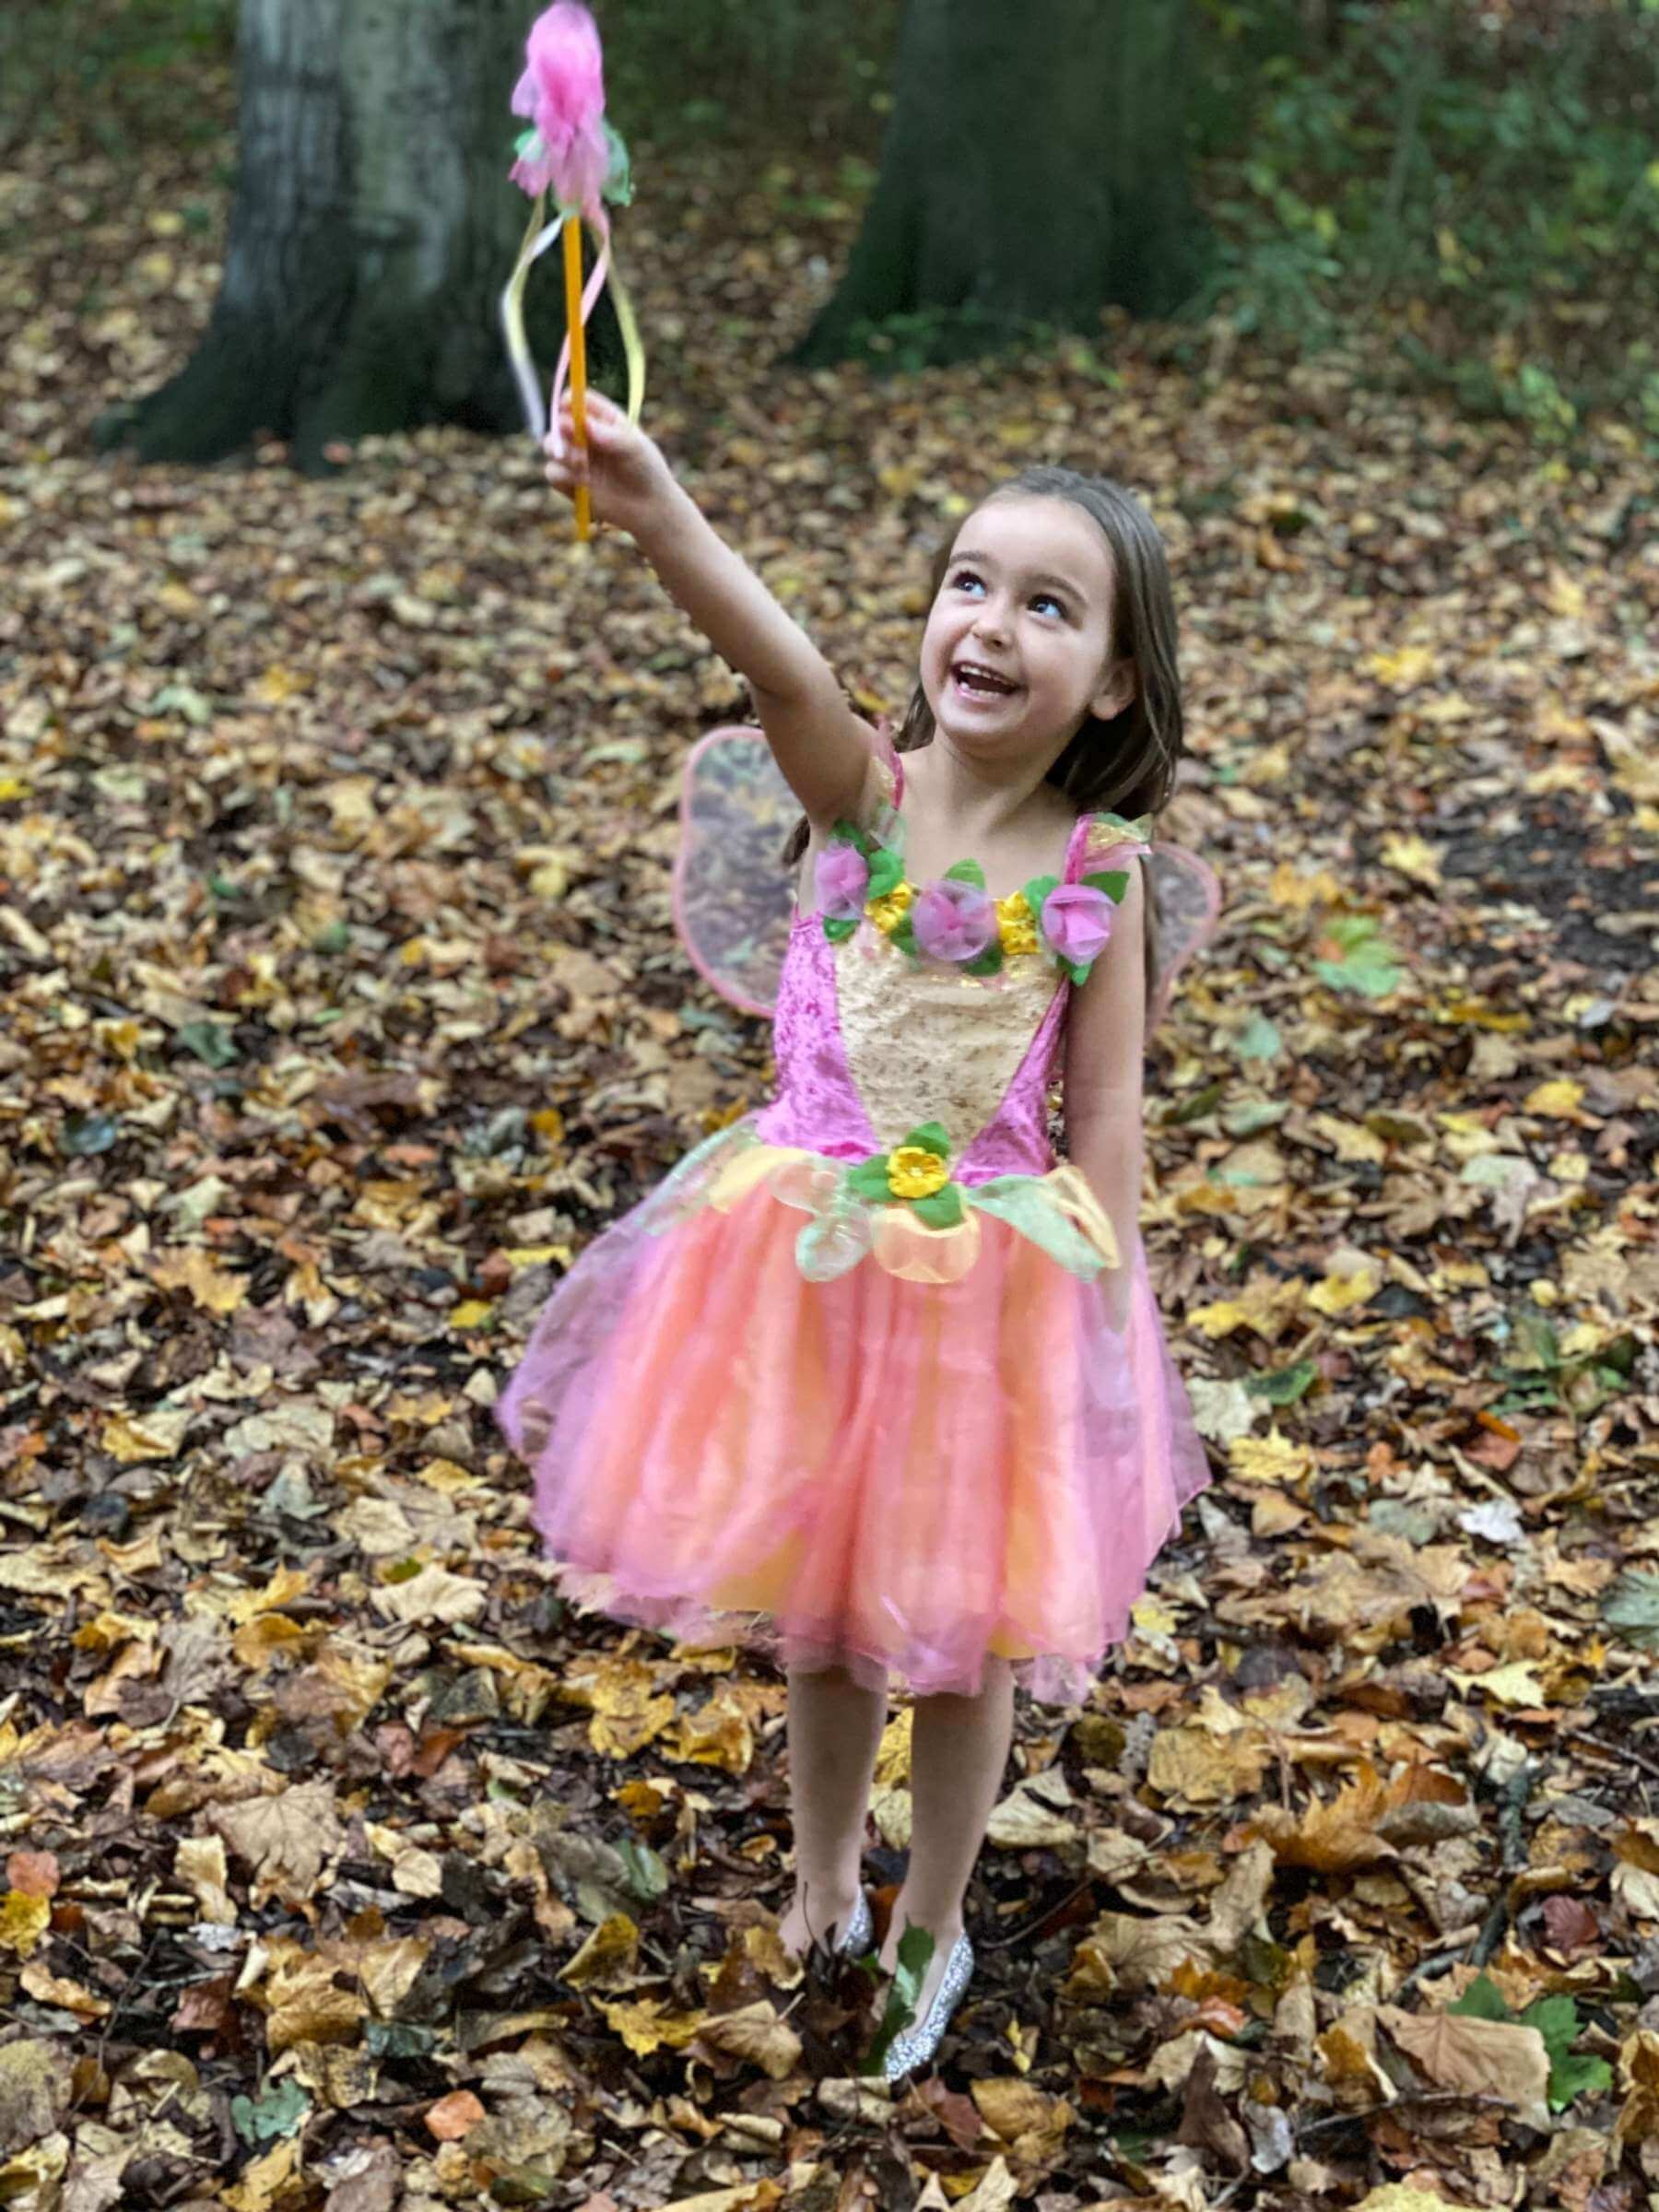 Girl stood in autumn leaves wearing a pink and yellow fairy costume holding a wand in the air.